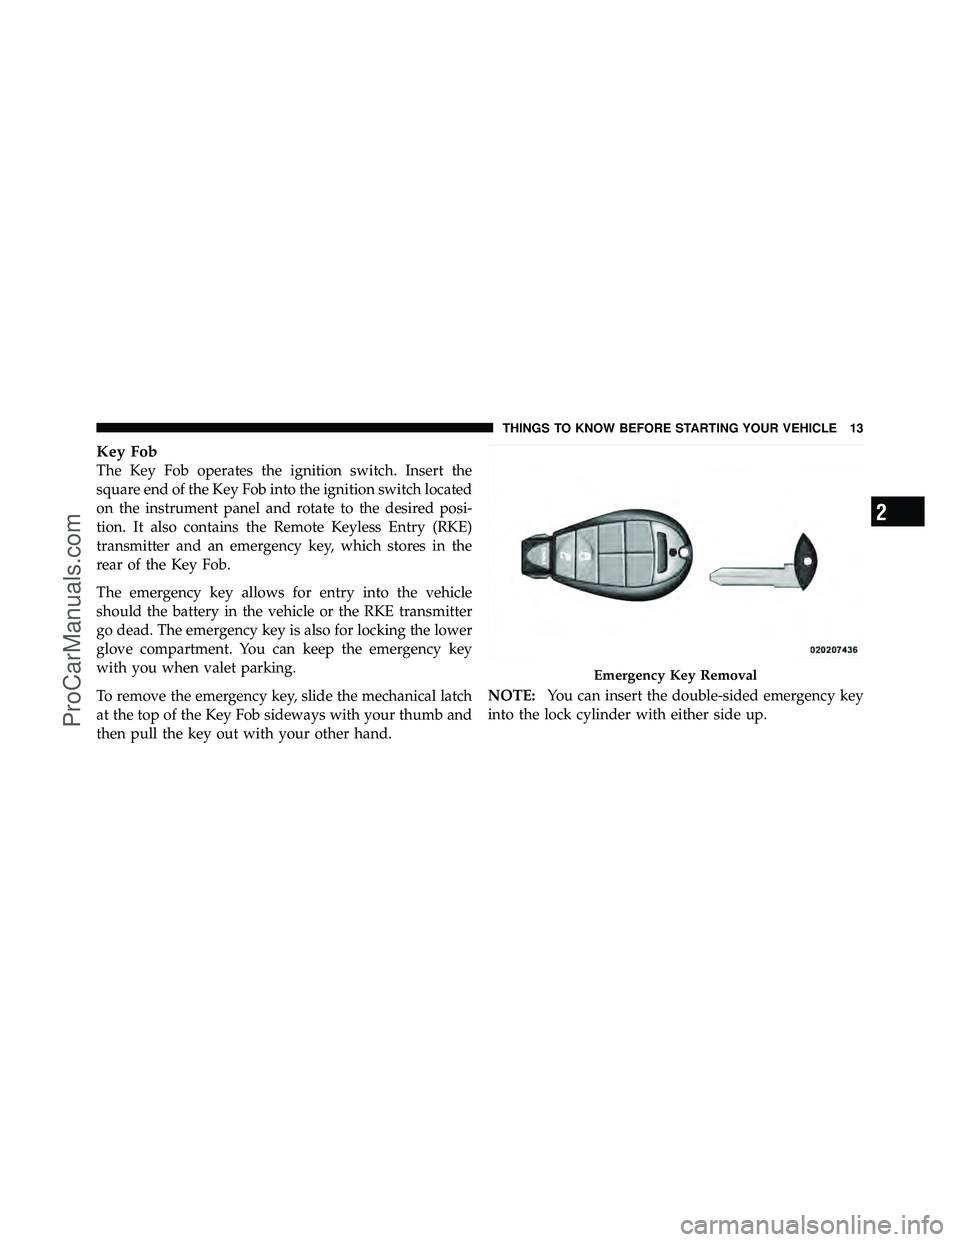 DODGE CARAVAN 2012 User Guide Key Fob
The Key Fob operates the ignition switch. Insert the
square end of the Key Fob into the ignition switch located
on the instrument panel and rotate to the desired posi-
tion. It also contains t